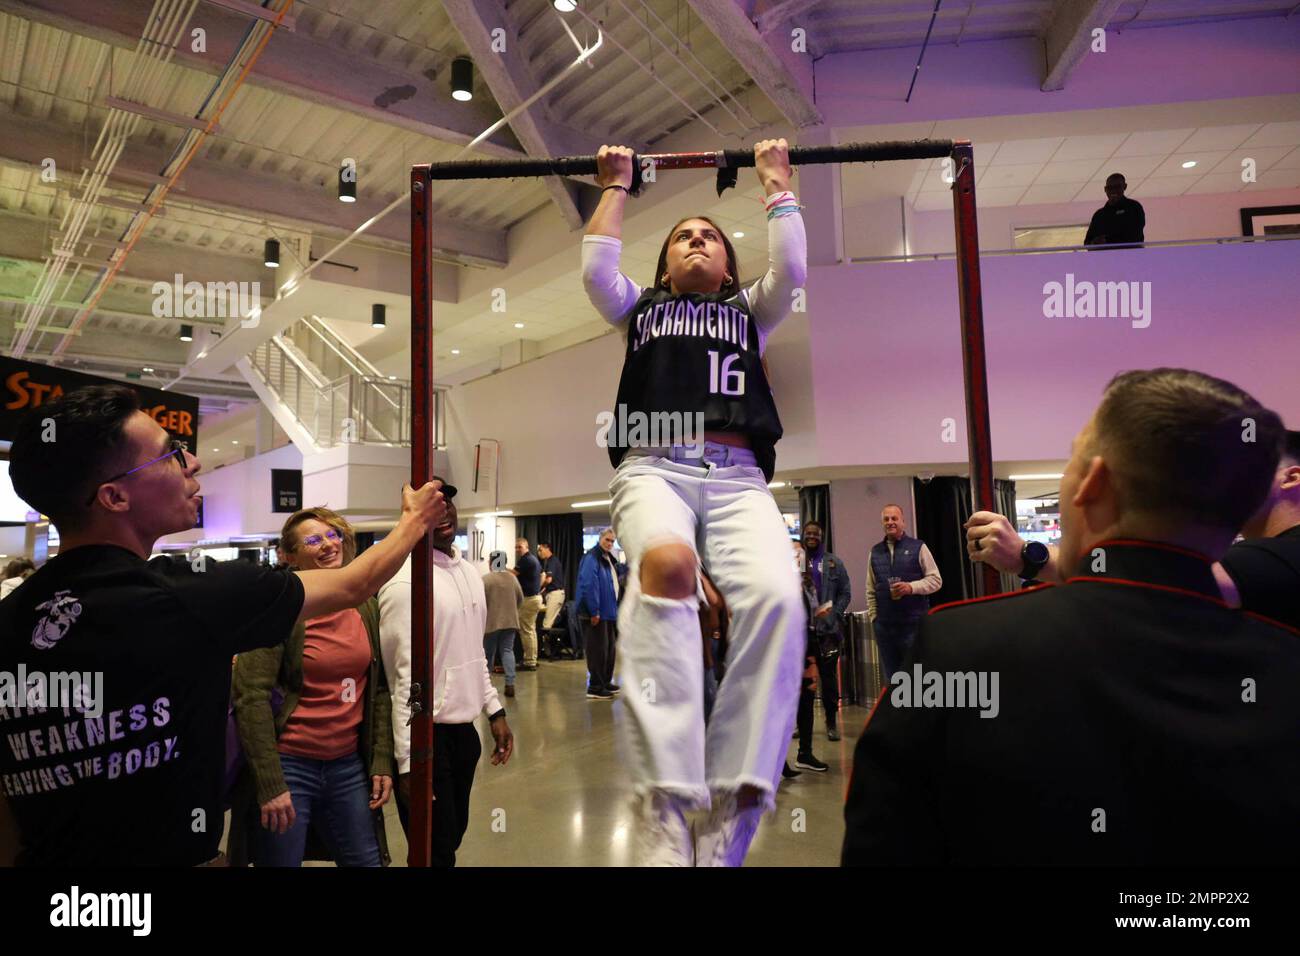 U.S. Marine Corps recruiters with Recruiting Station Sacramento encourage an attendee doing pull-ups during the Sacramento Kings’ Salute to Service Night in Sacramento, California on Nov. 9, 2022. Marines with Recruiting Station Sacramento attended Salute to Service Night to interact with the community. Stock Photo